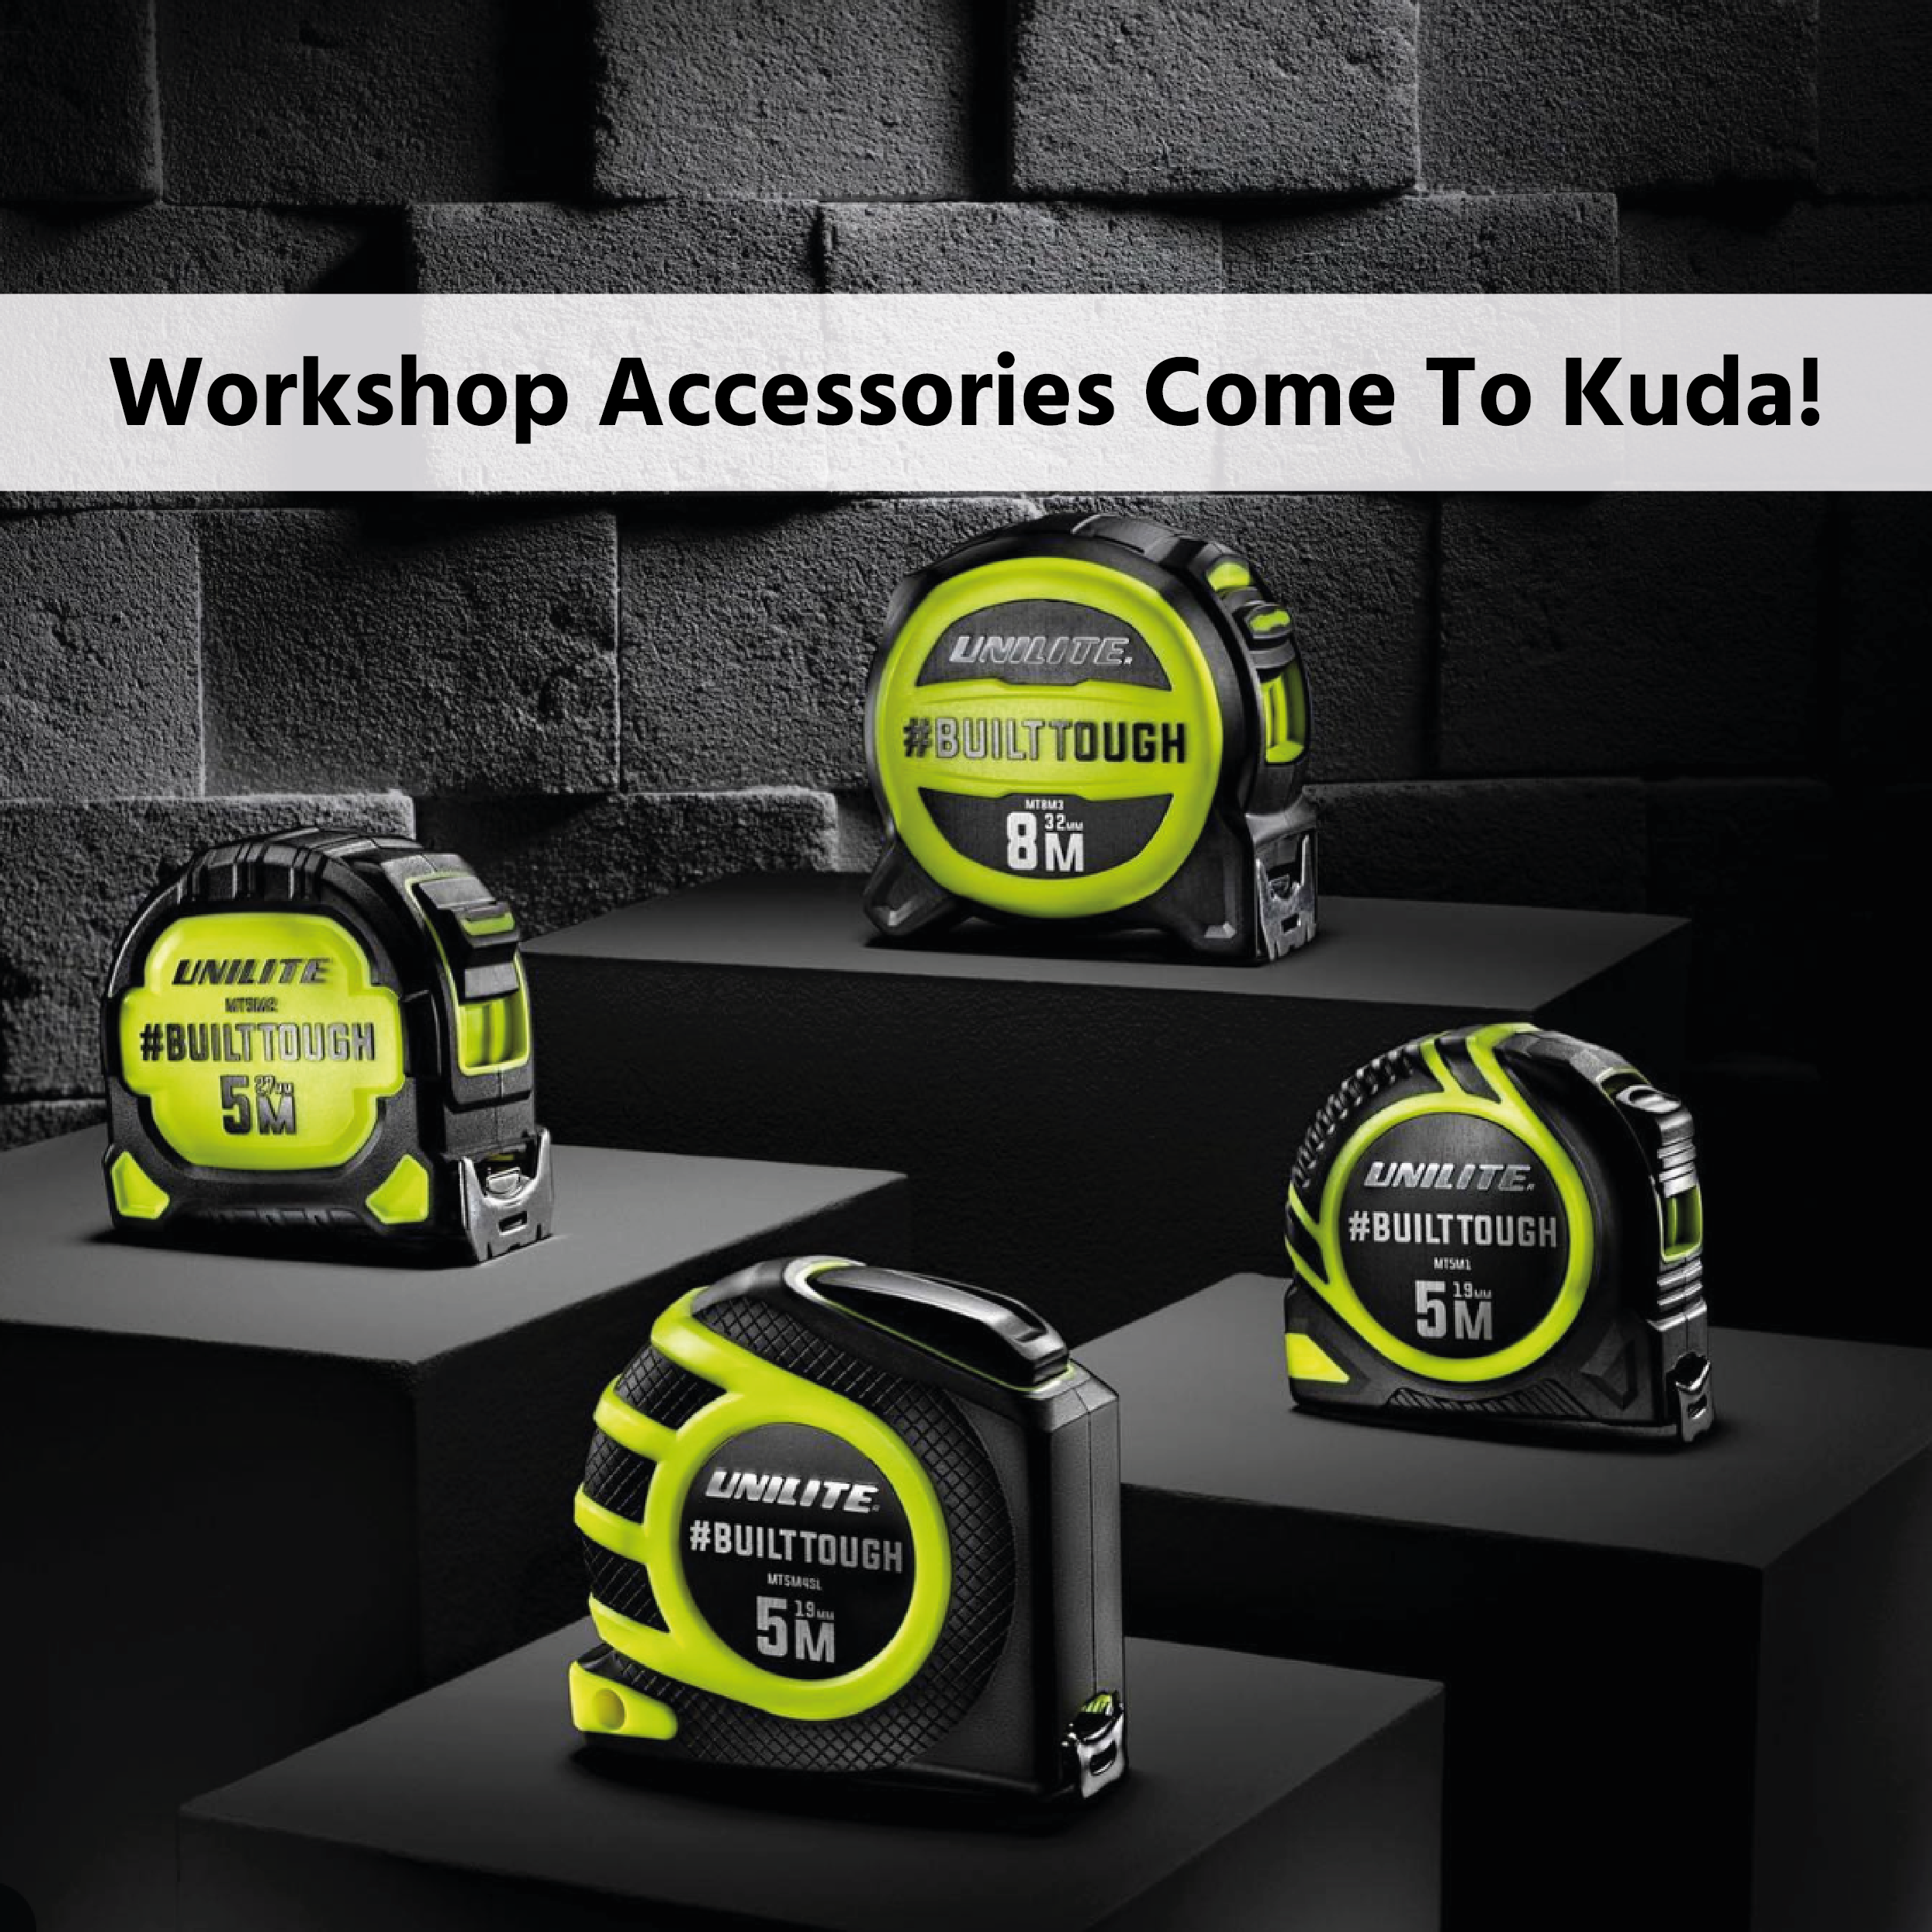 Image of Workshop Accessories Come To Kuda!